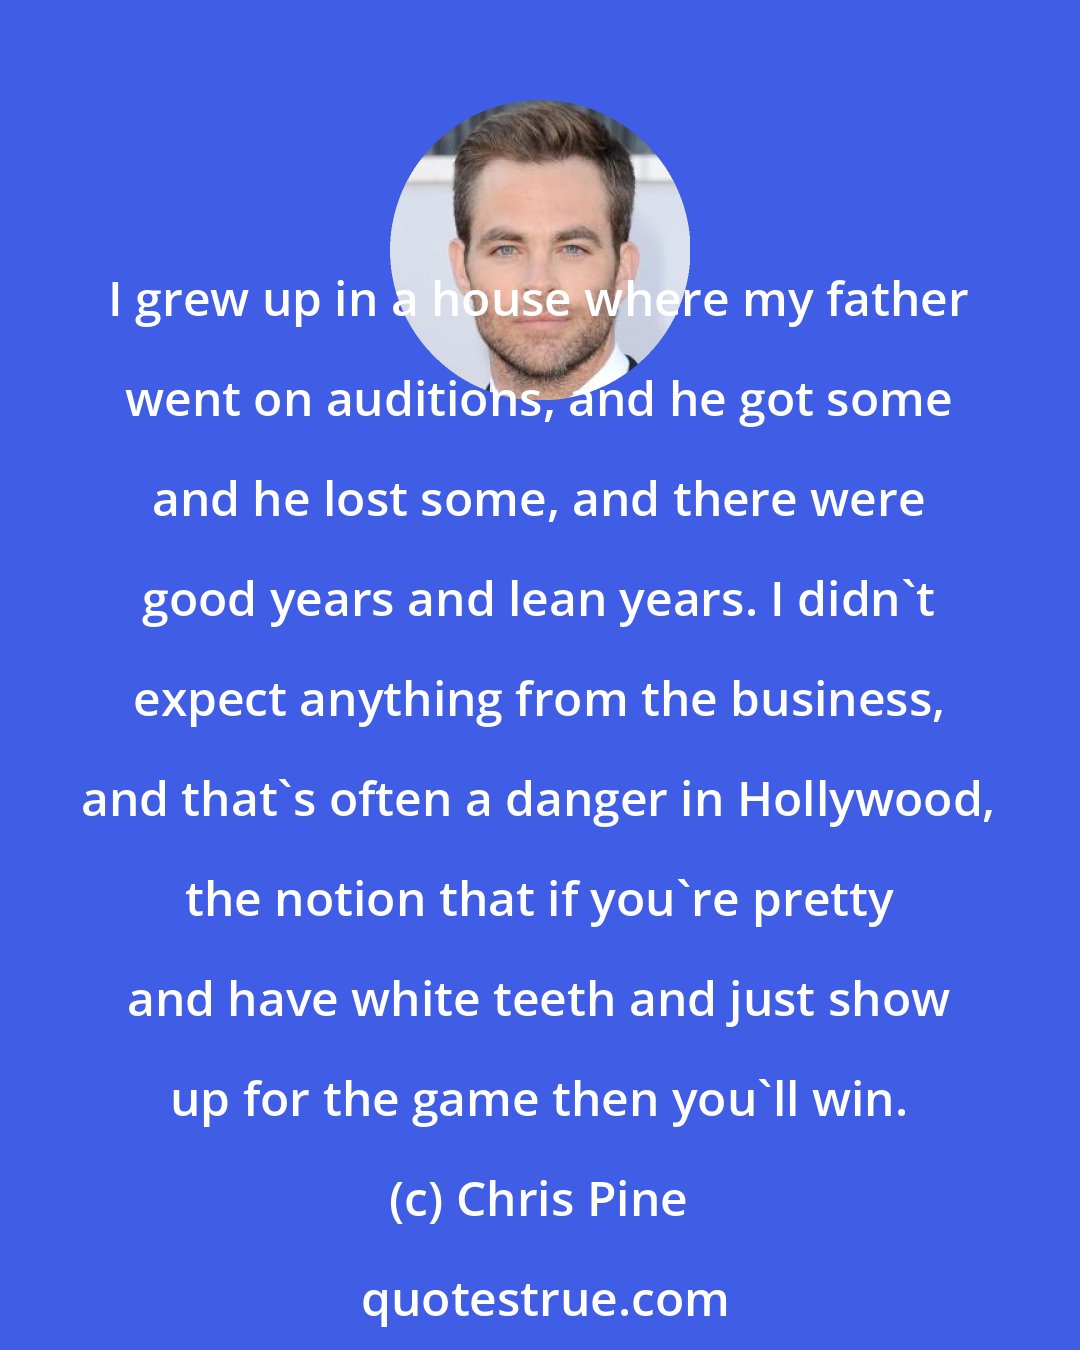 Chris Pine: I grew up in a house where my father went on auditions, and he got some and he lost some, and there were good years and lean years. I didn't expect anything from the business, and that's often a danger in Hollywood, the notion that if you're pretty and have white teeth and just show up for the game then you'll win.